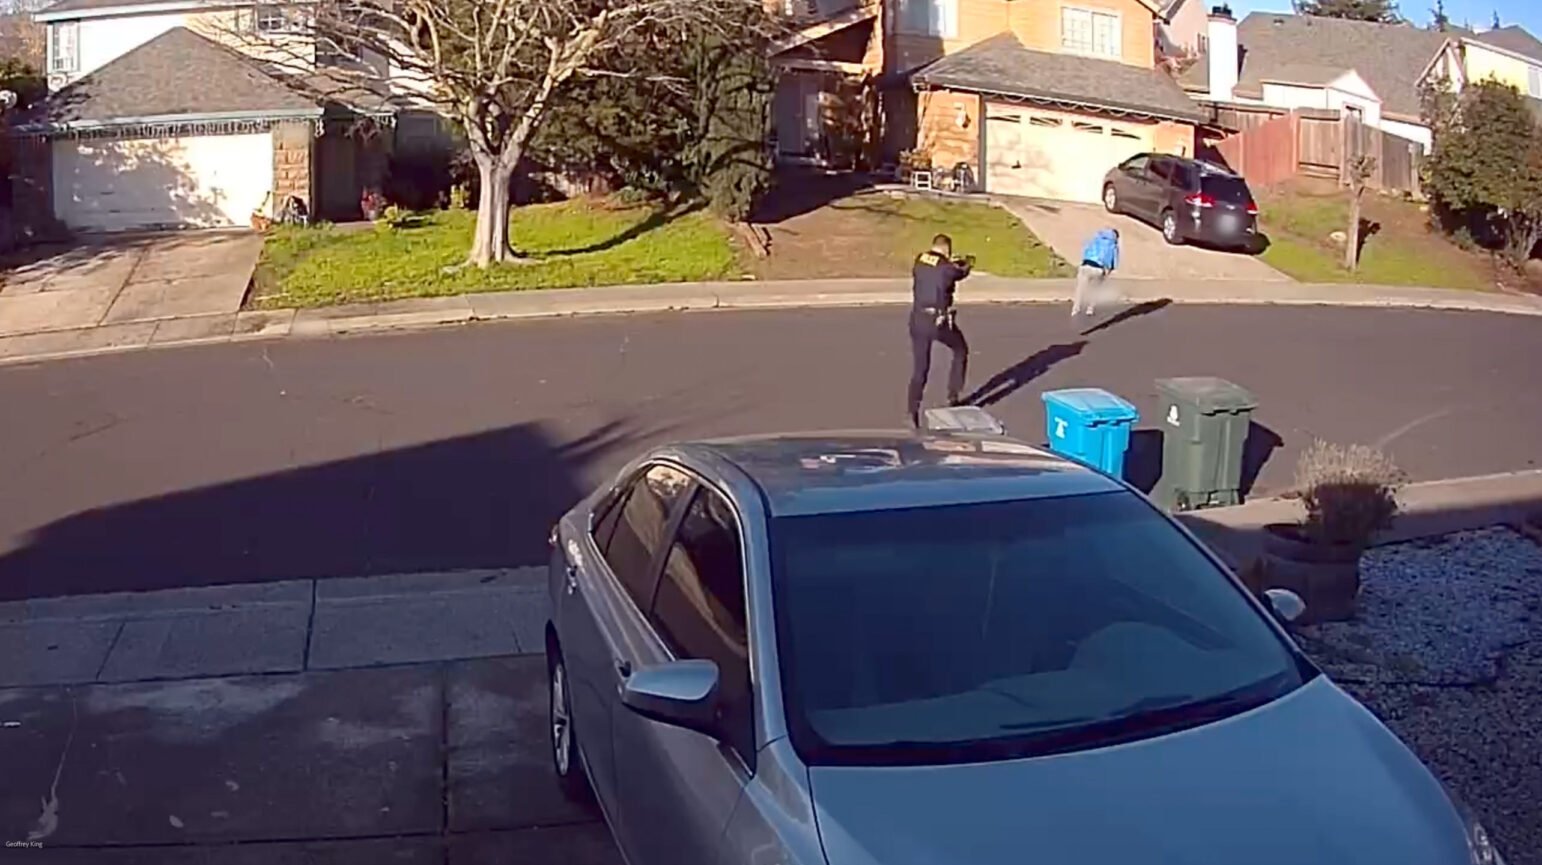 The image, a still from a security camera, shows a suburban street with two individuals and two cars visible. One, a police officer, is in the process of firing a handgun. The second person, dressed in a blue top and dark pants, is falling while in the process of running away toward a house.